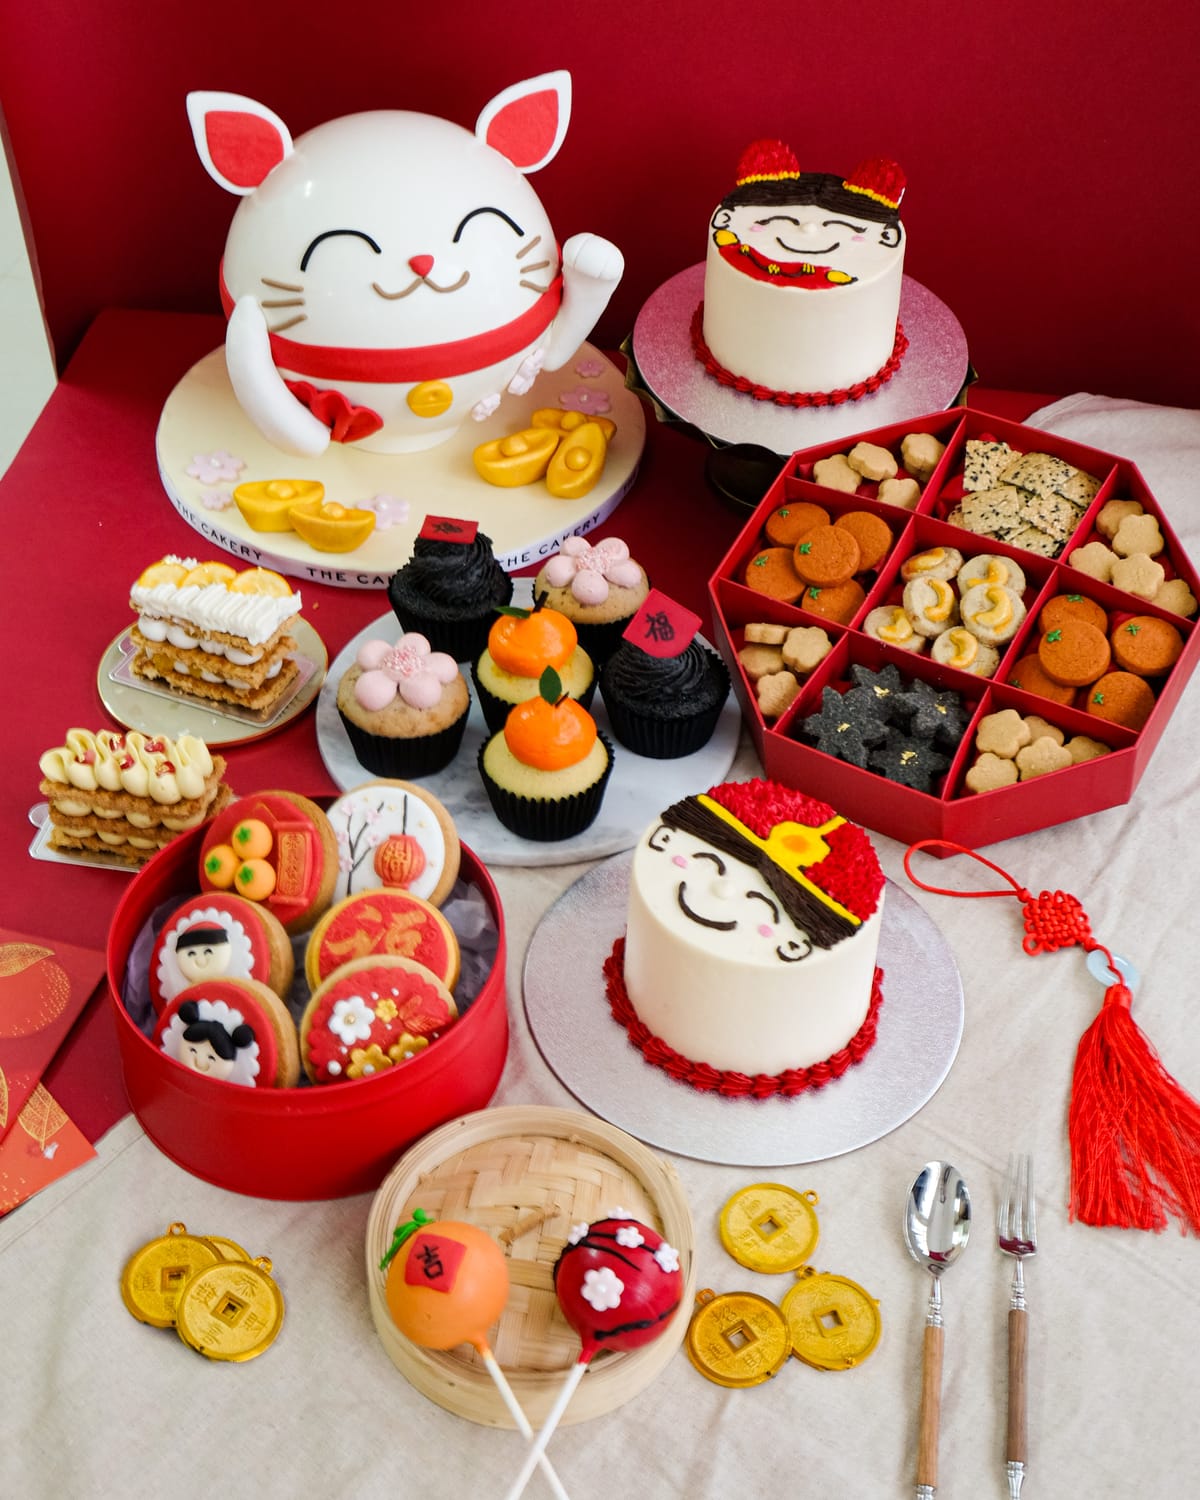 The Cakery introduces health-conscious delights to ring in The Year of the Dragon